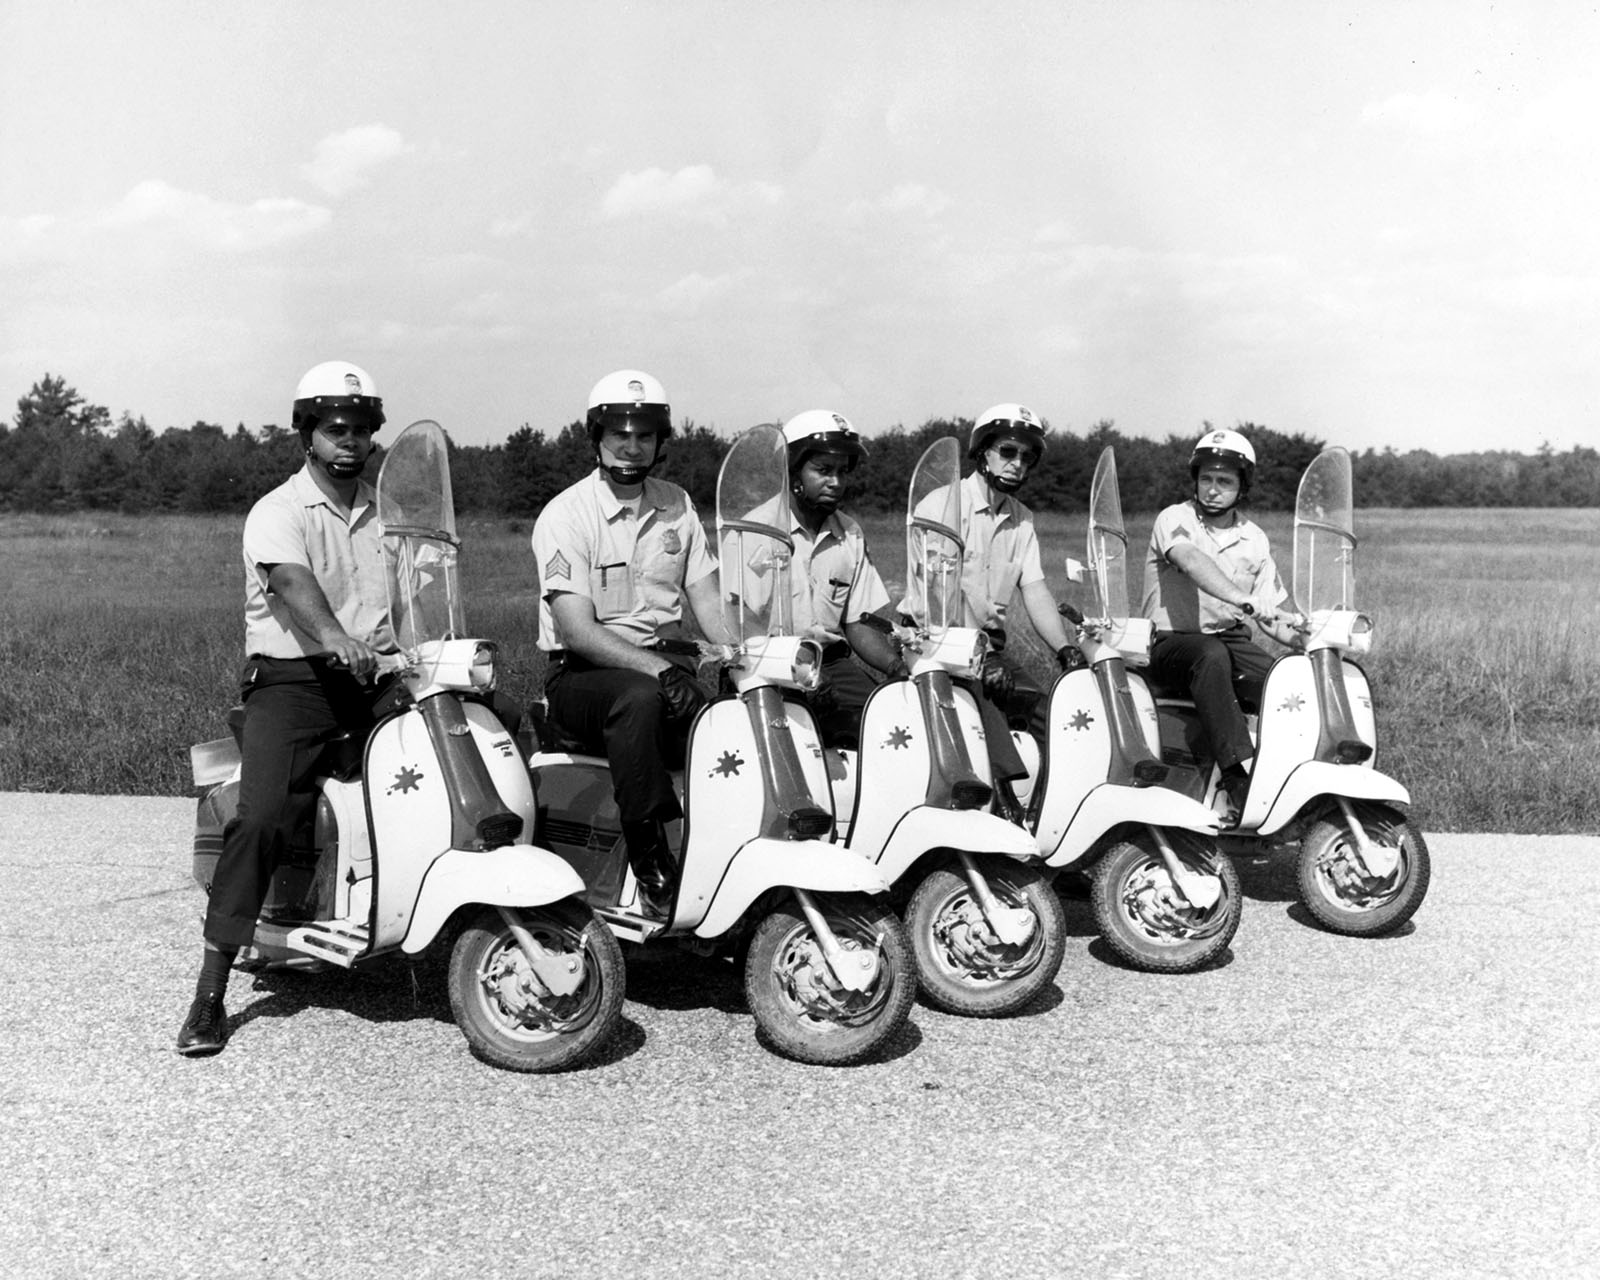 Members of the Uniformed Division line up on motorscooters.